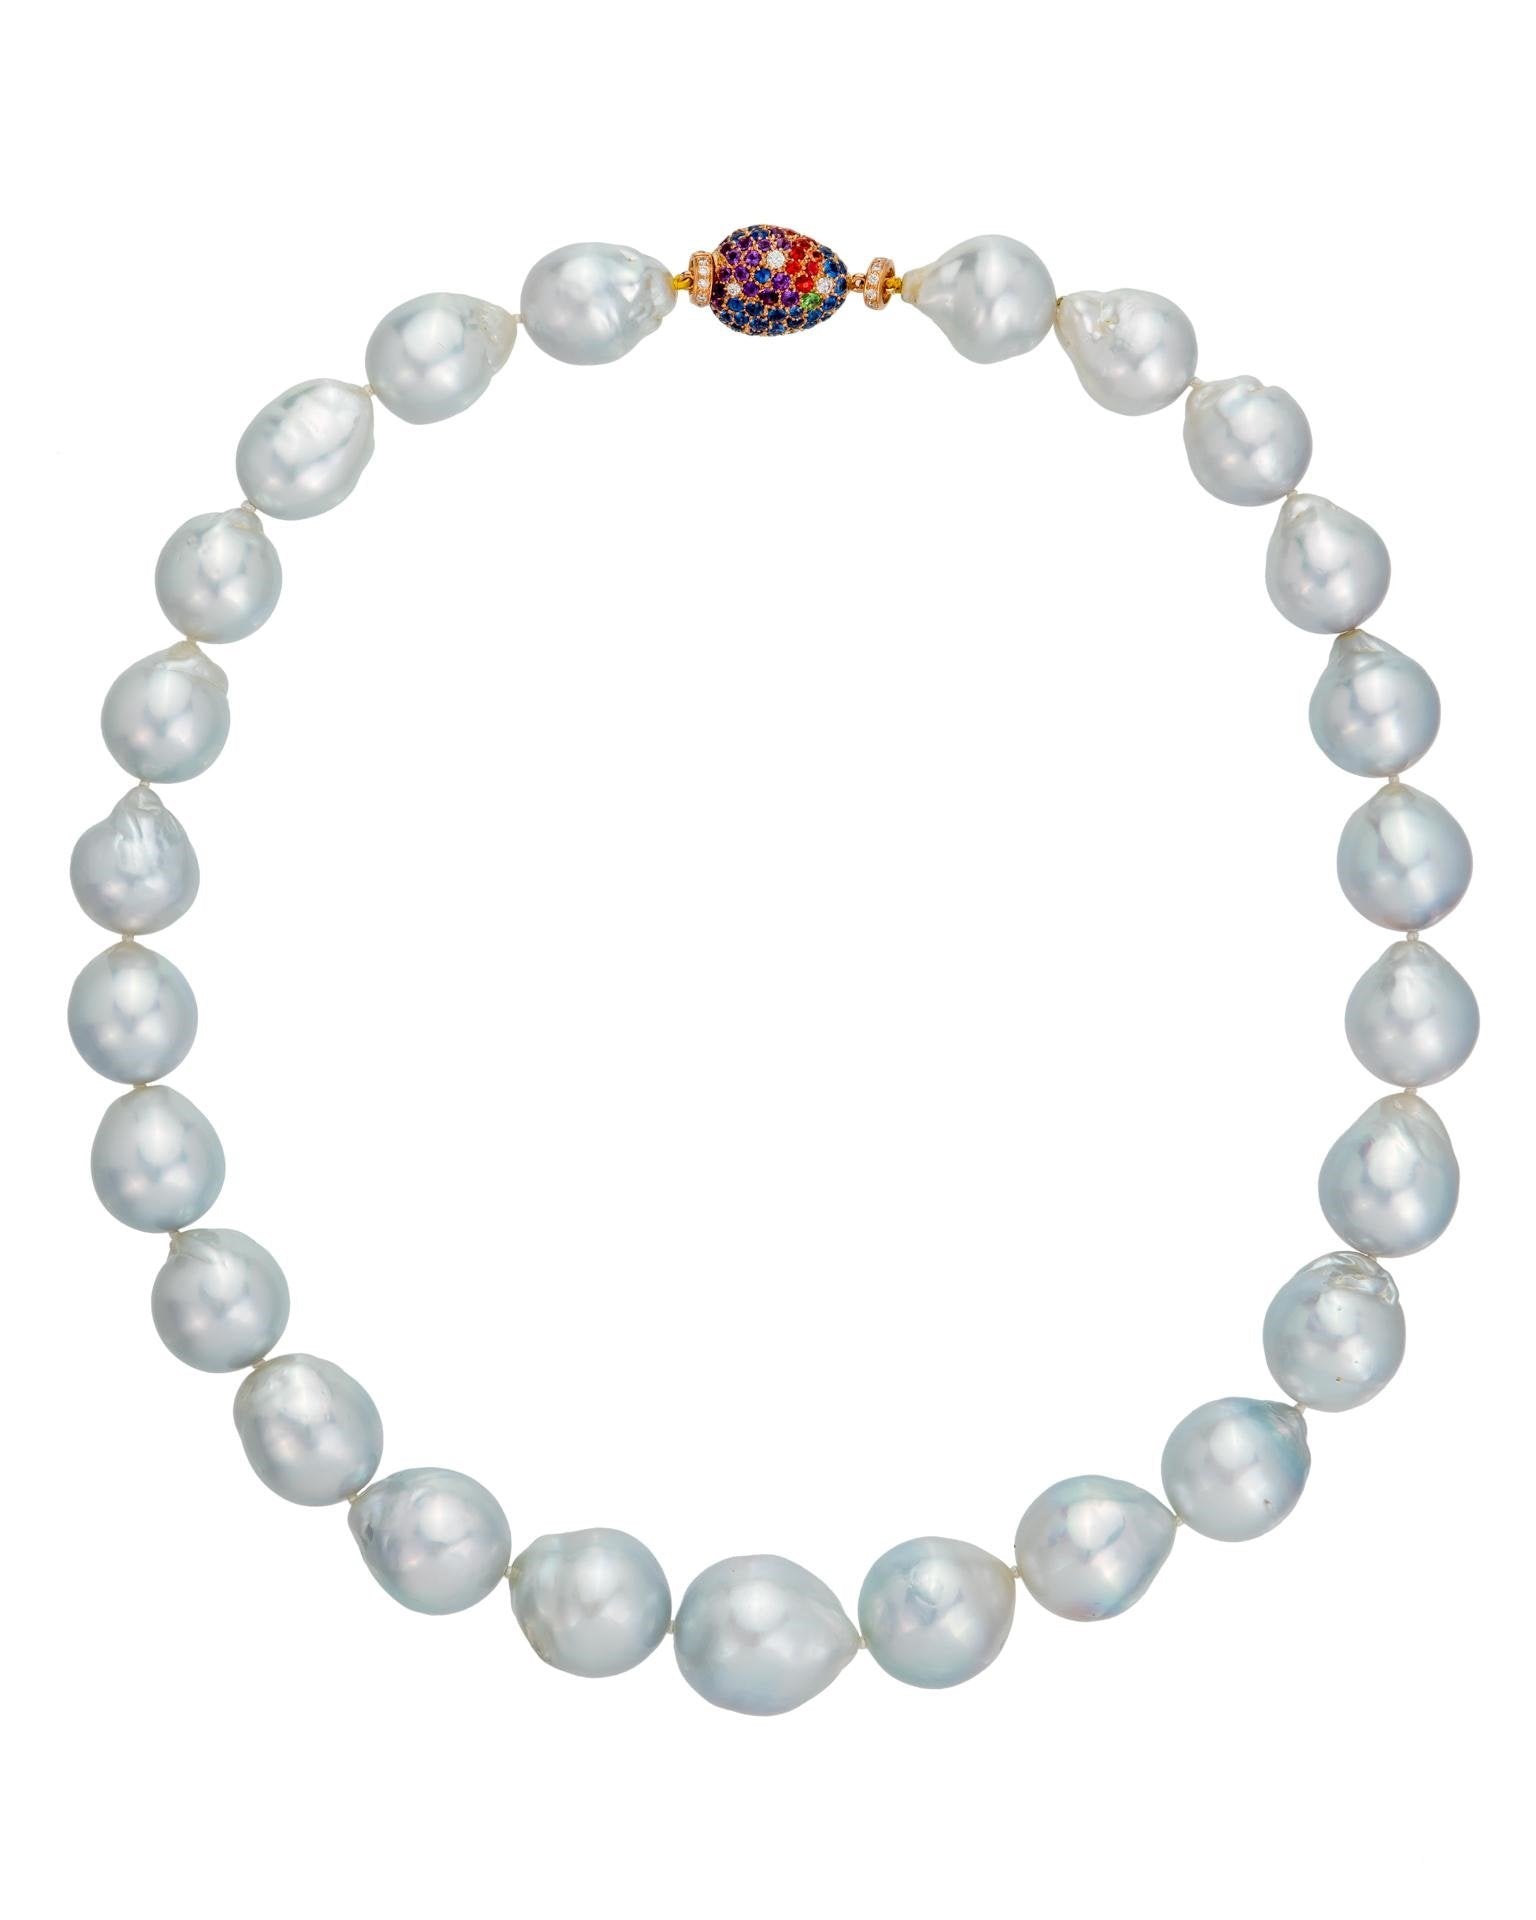 South Sea pearl strand with multi-stone clasp, crafted in 18 karat rose gold.